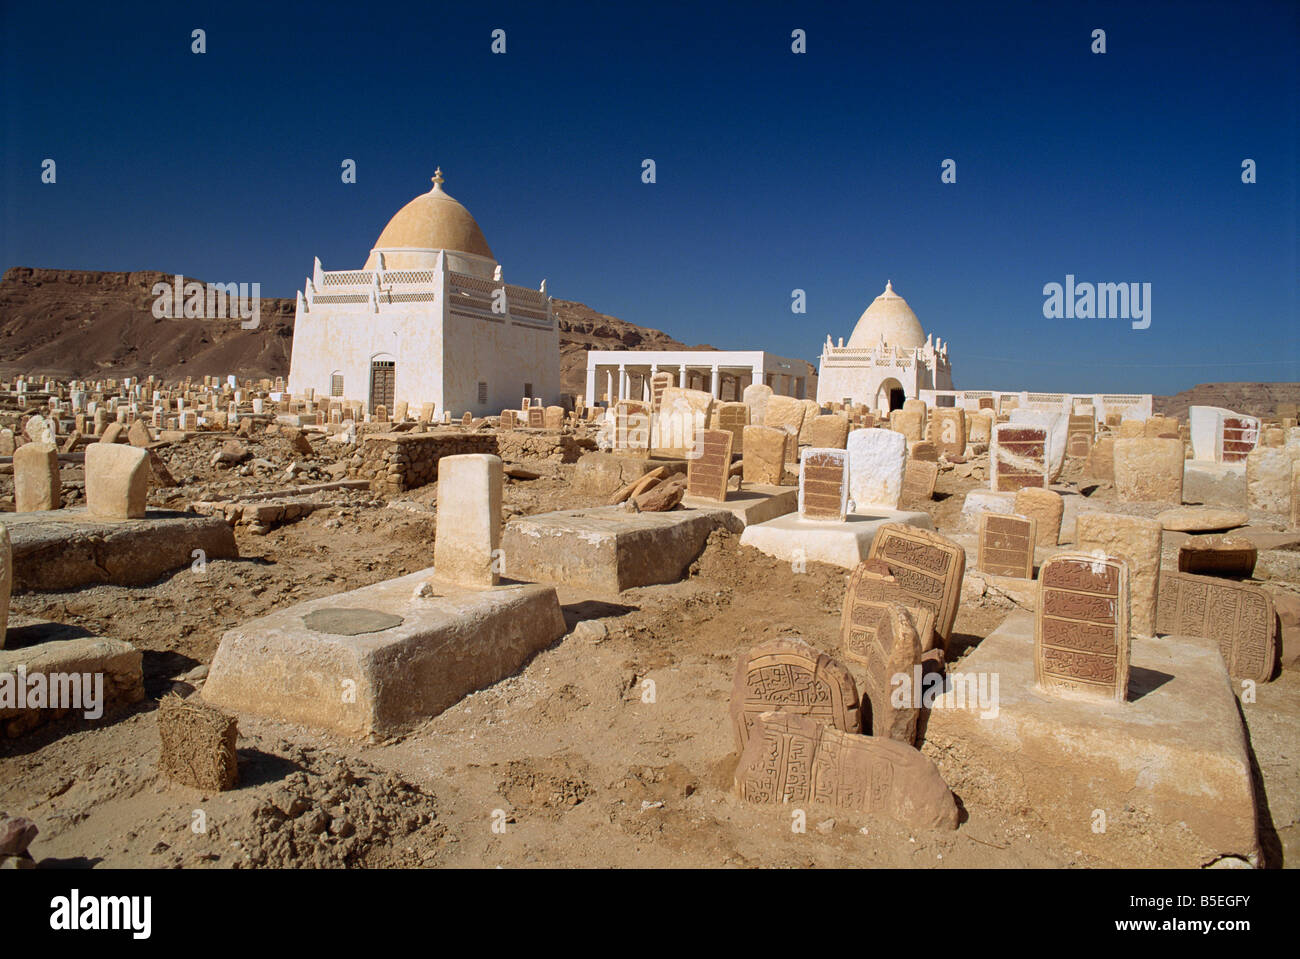 Old graves and tombs in the Einat Cemetery, near Tarim, in the Wadi Hadramaut, Yemen, Middle East Stock Photo